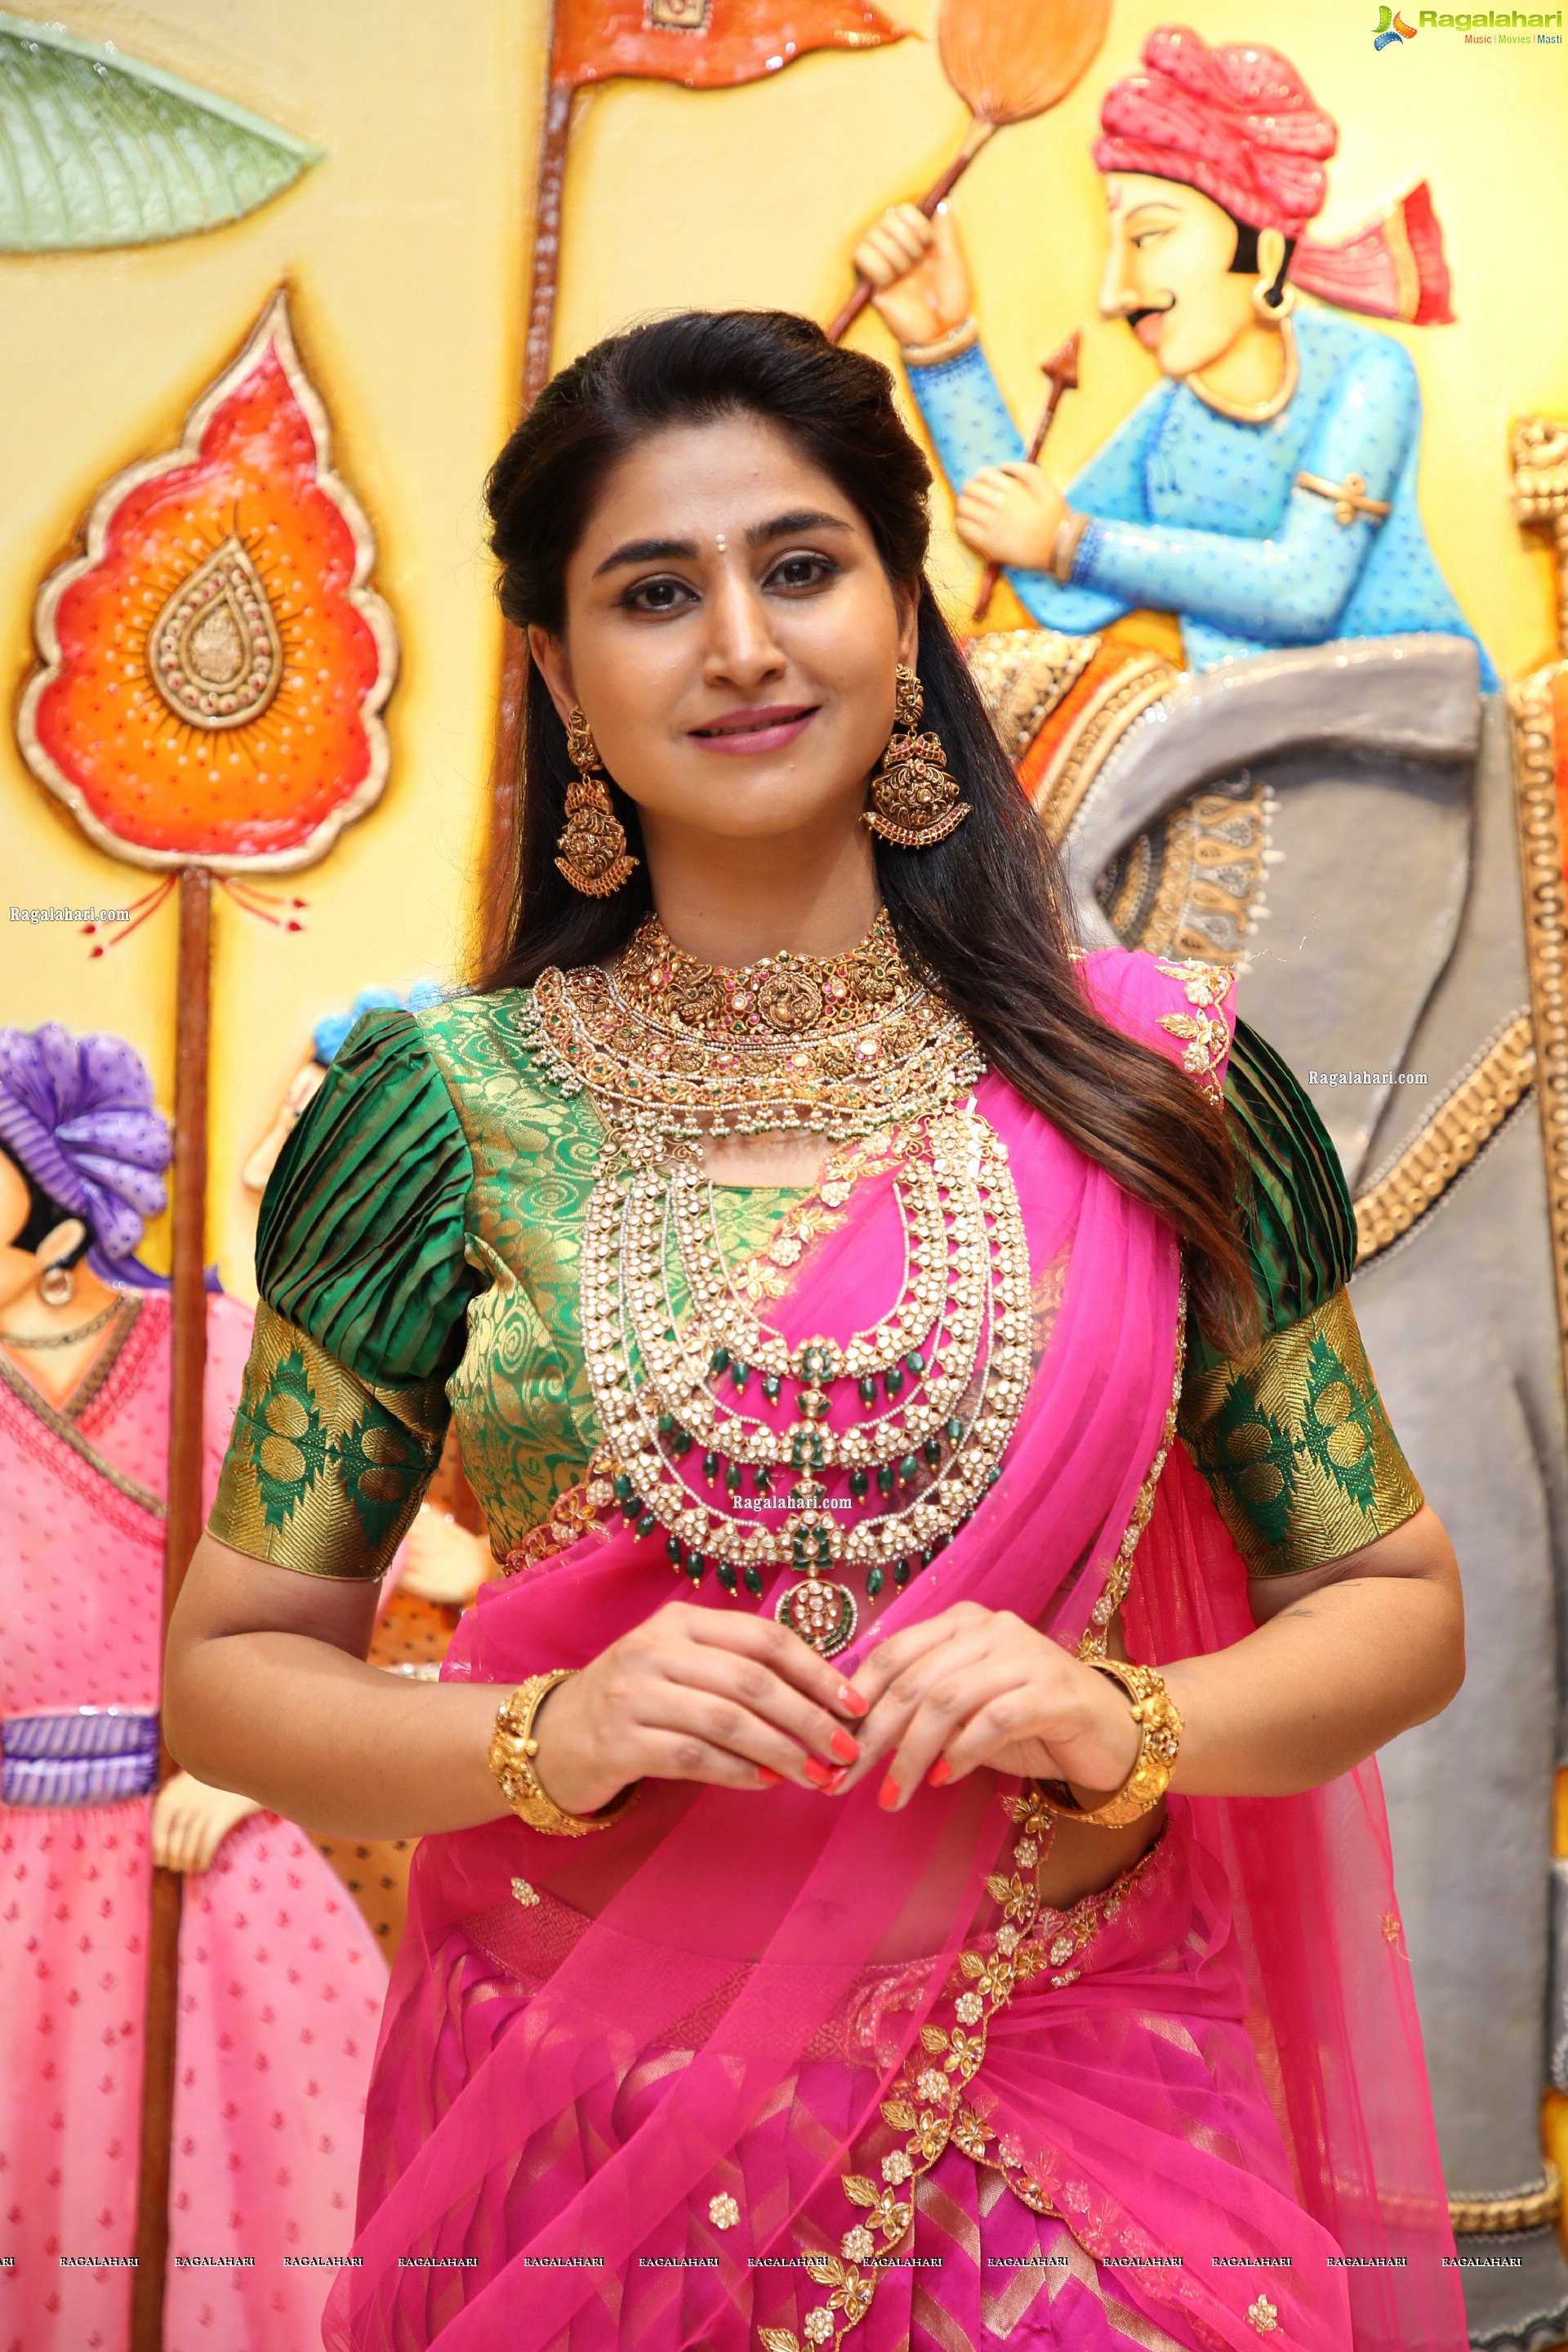 Varshini Sounderajan Poses With Gold Jewellery, HD Photo Gallery